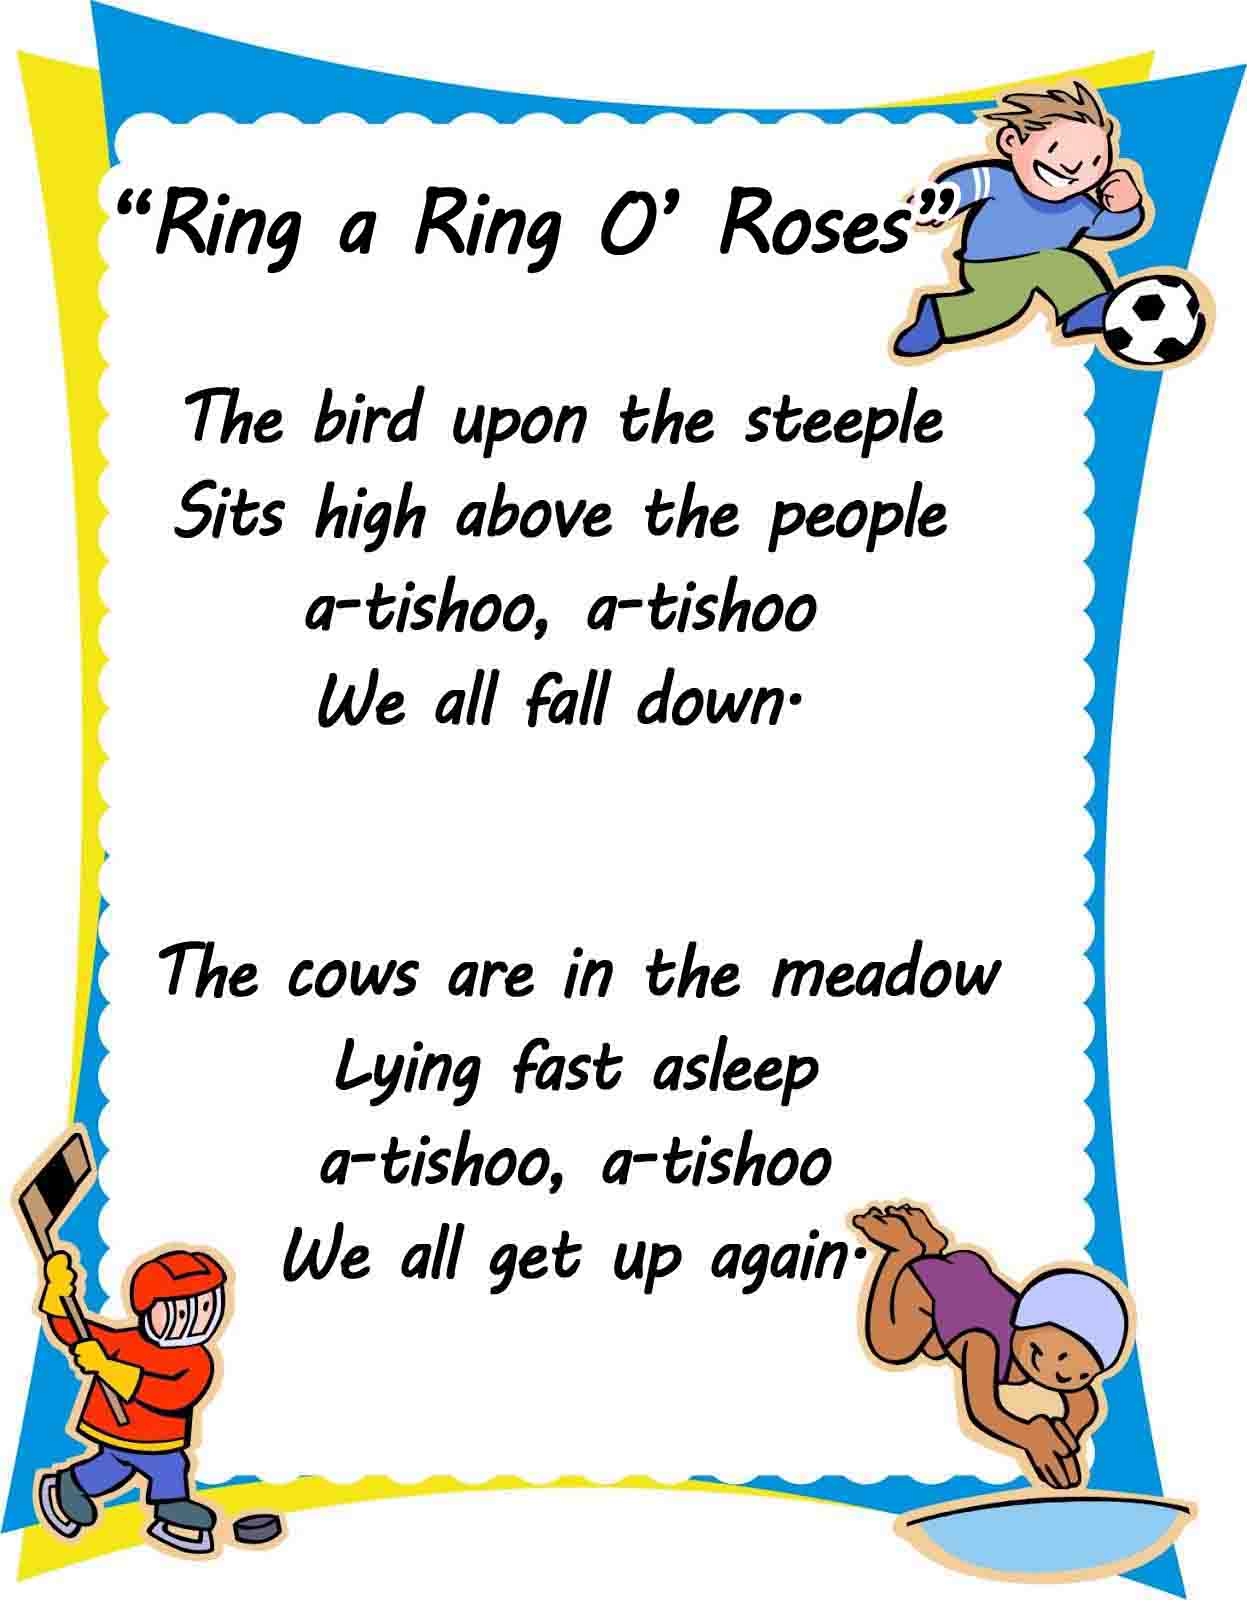 Ring A Ringa O Roses By Colorzoneindia-d59v0ca C by colorzoneindia on  DeviantArt